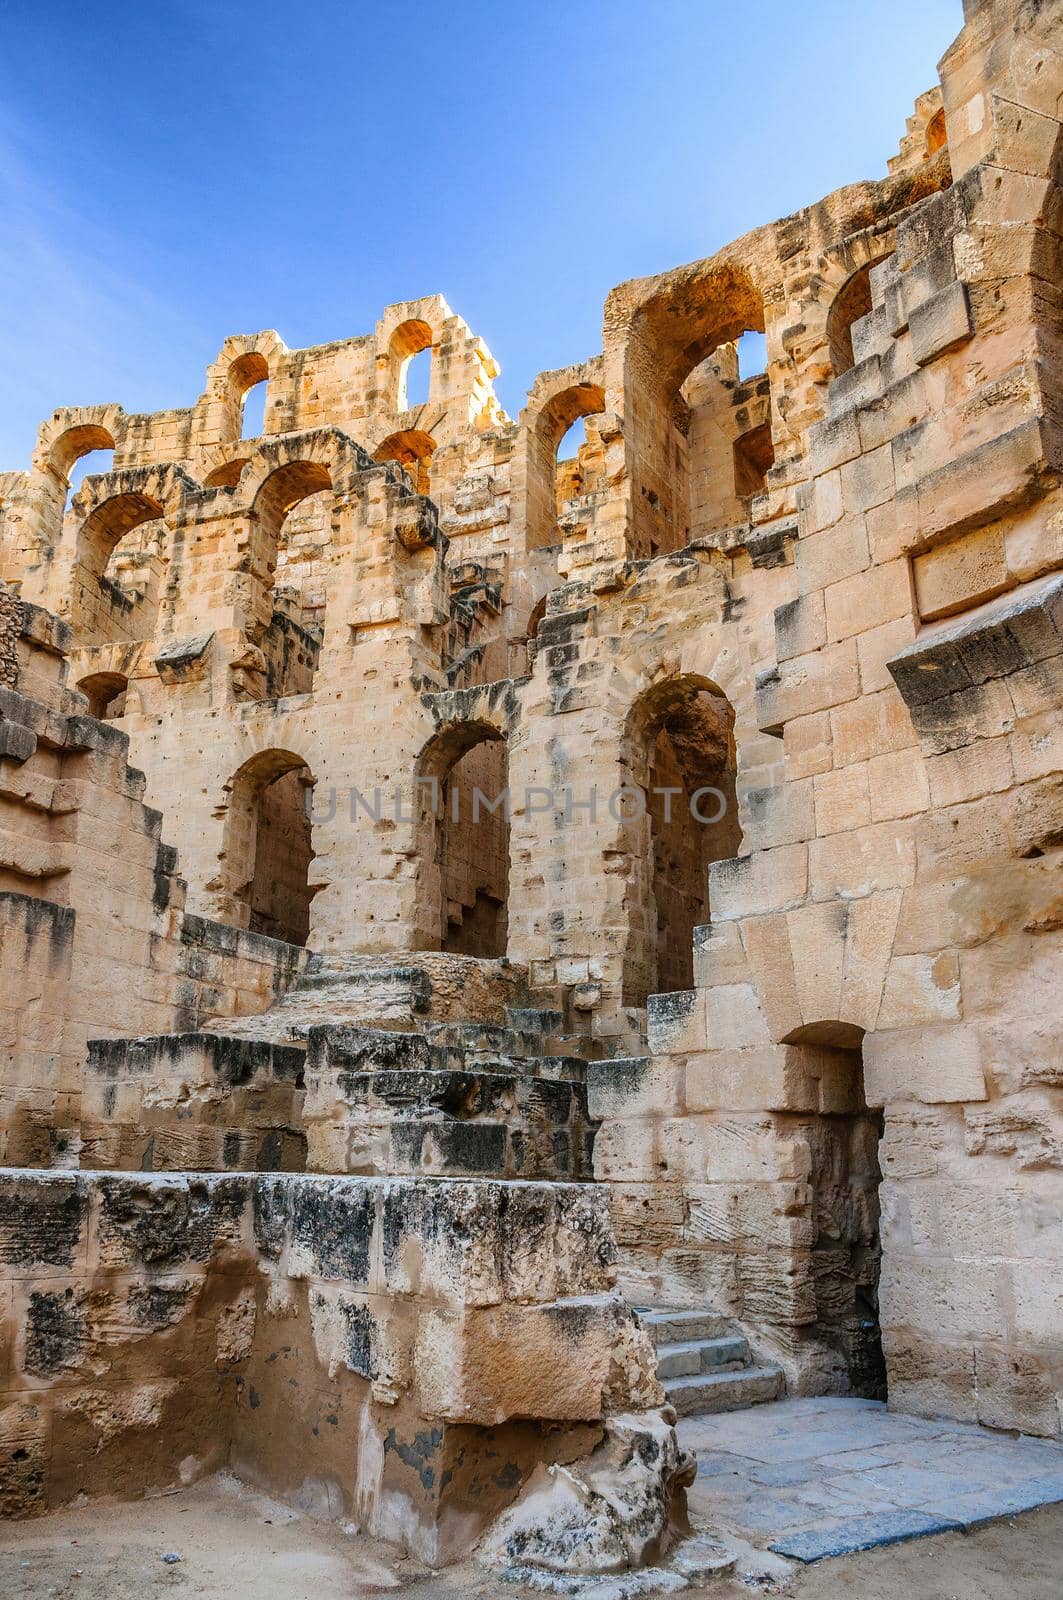 Ruins of the largest coliseum in North Africa. El Jem,Tunisia, UNESCO by Eagle2308